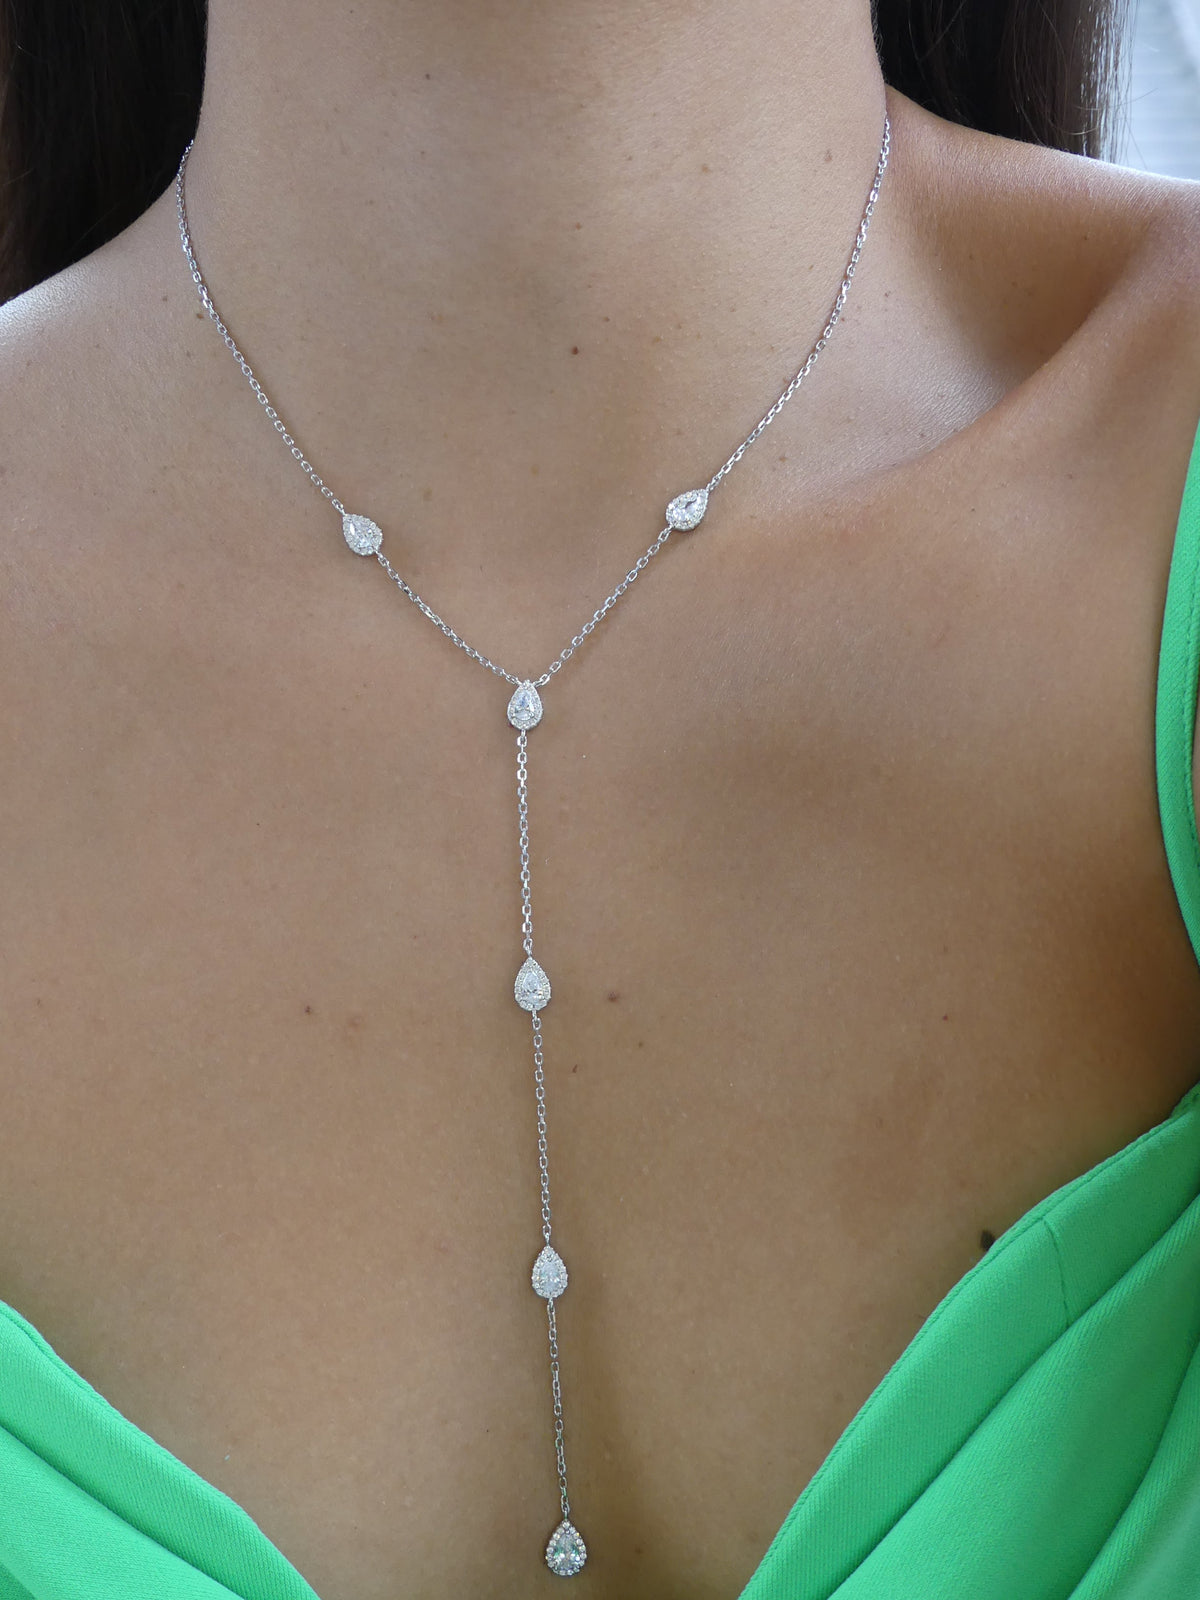 necklaces, long necklaces, sterling silver and white gold necklaces, necklaces for special occasions, jewelry for wedding dress, jewelry for formal attire, fashion jewelry, designer jewelry, accessories, fine jewelry, simulated diamonds, cubic zirconia , necklaces that wont turn green, nickel free jewelry , gift ideas, going out jewelry, trending on instagram and tiktok